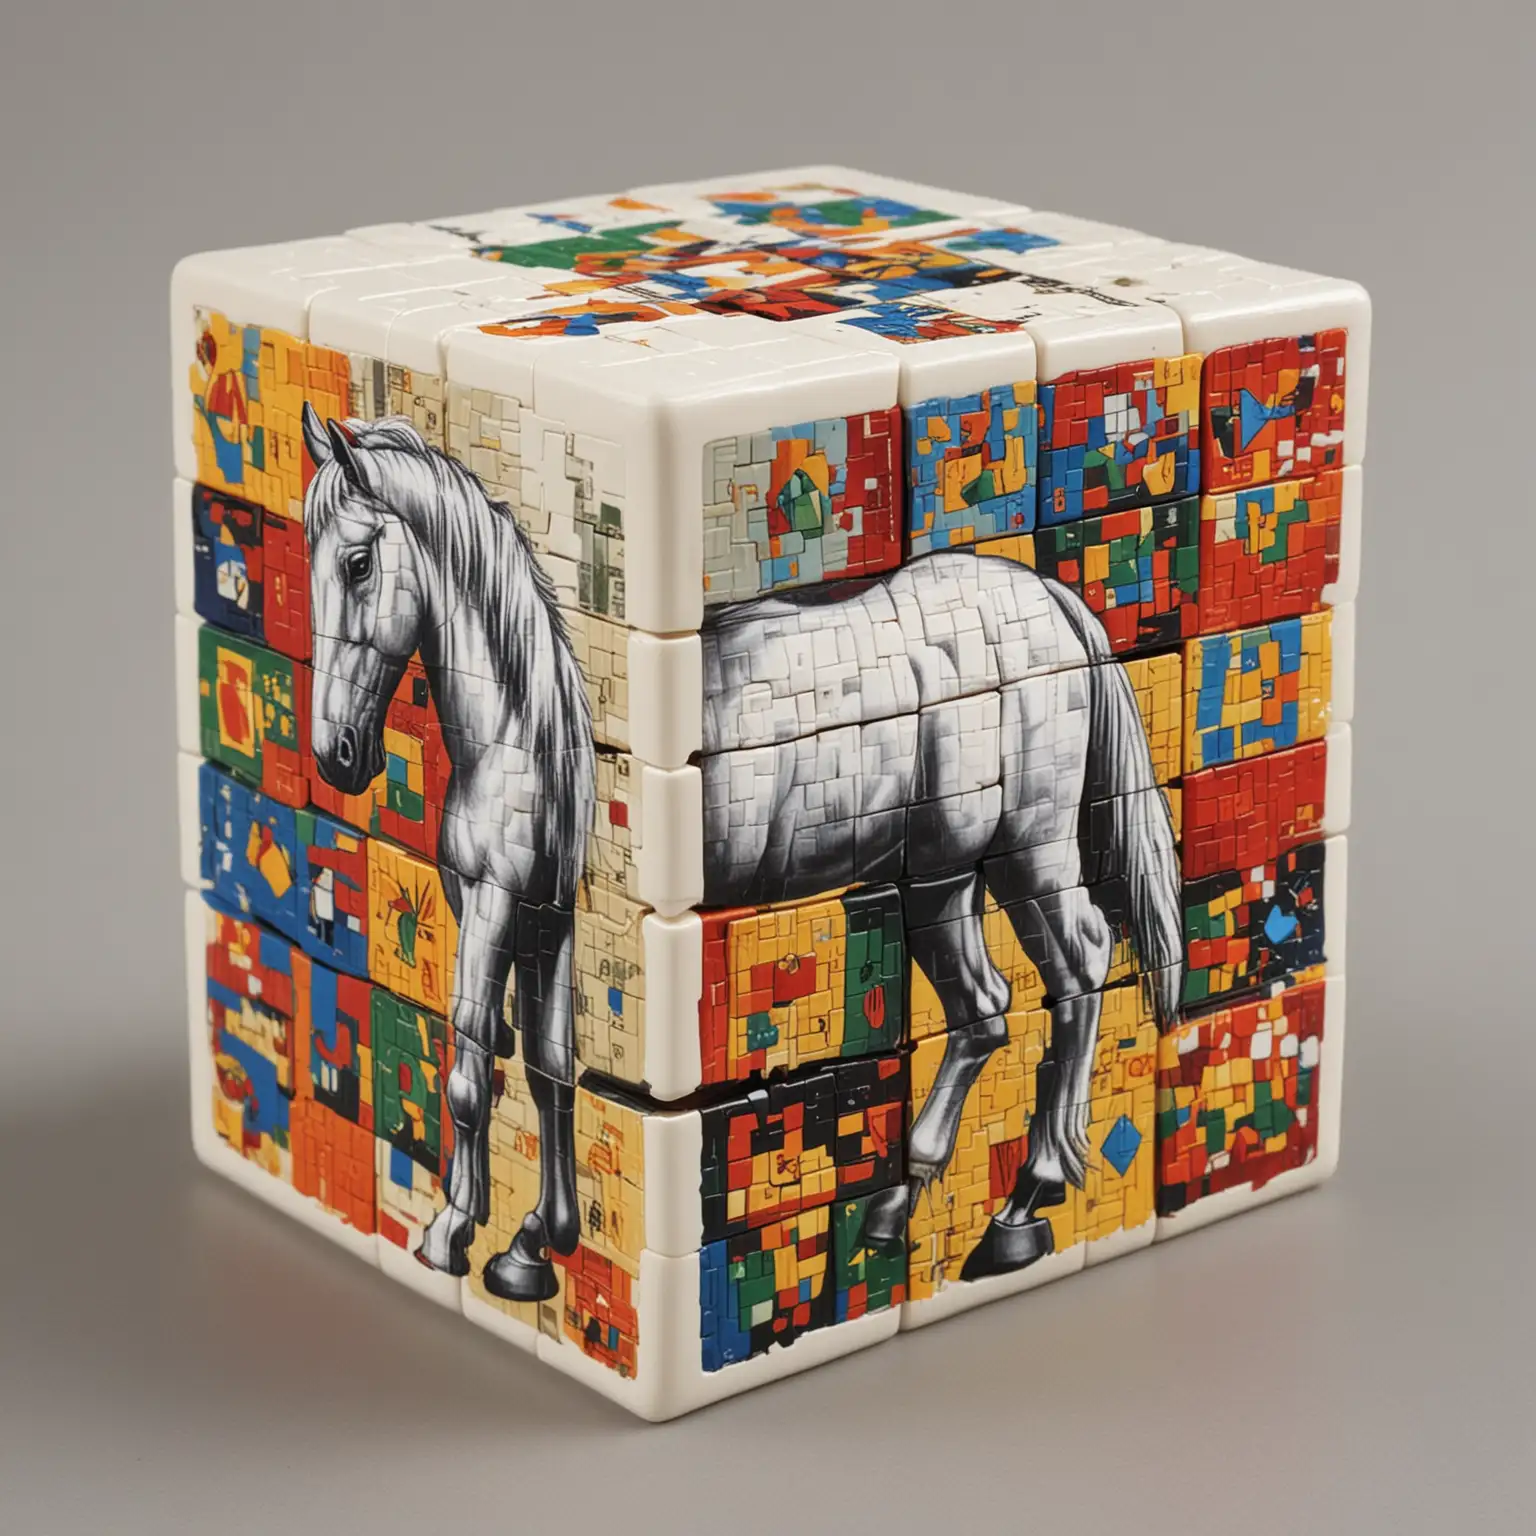 rubik's cube with motif of a white horse